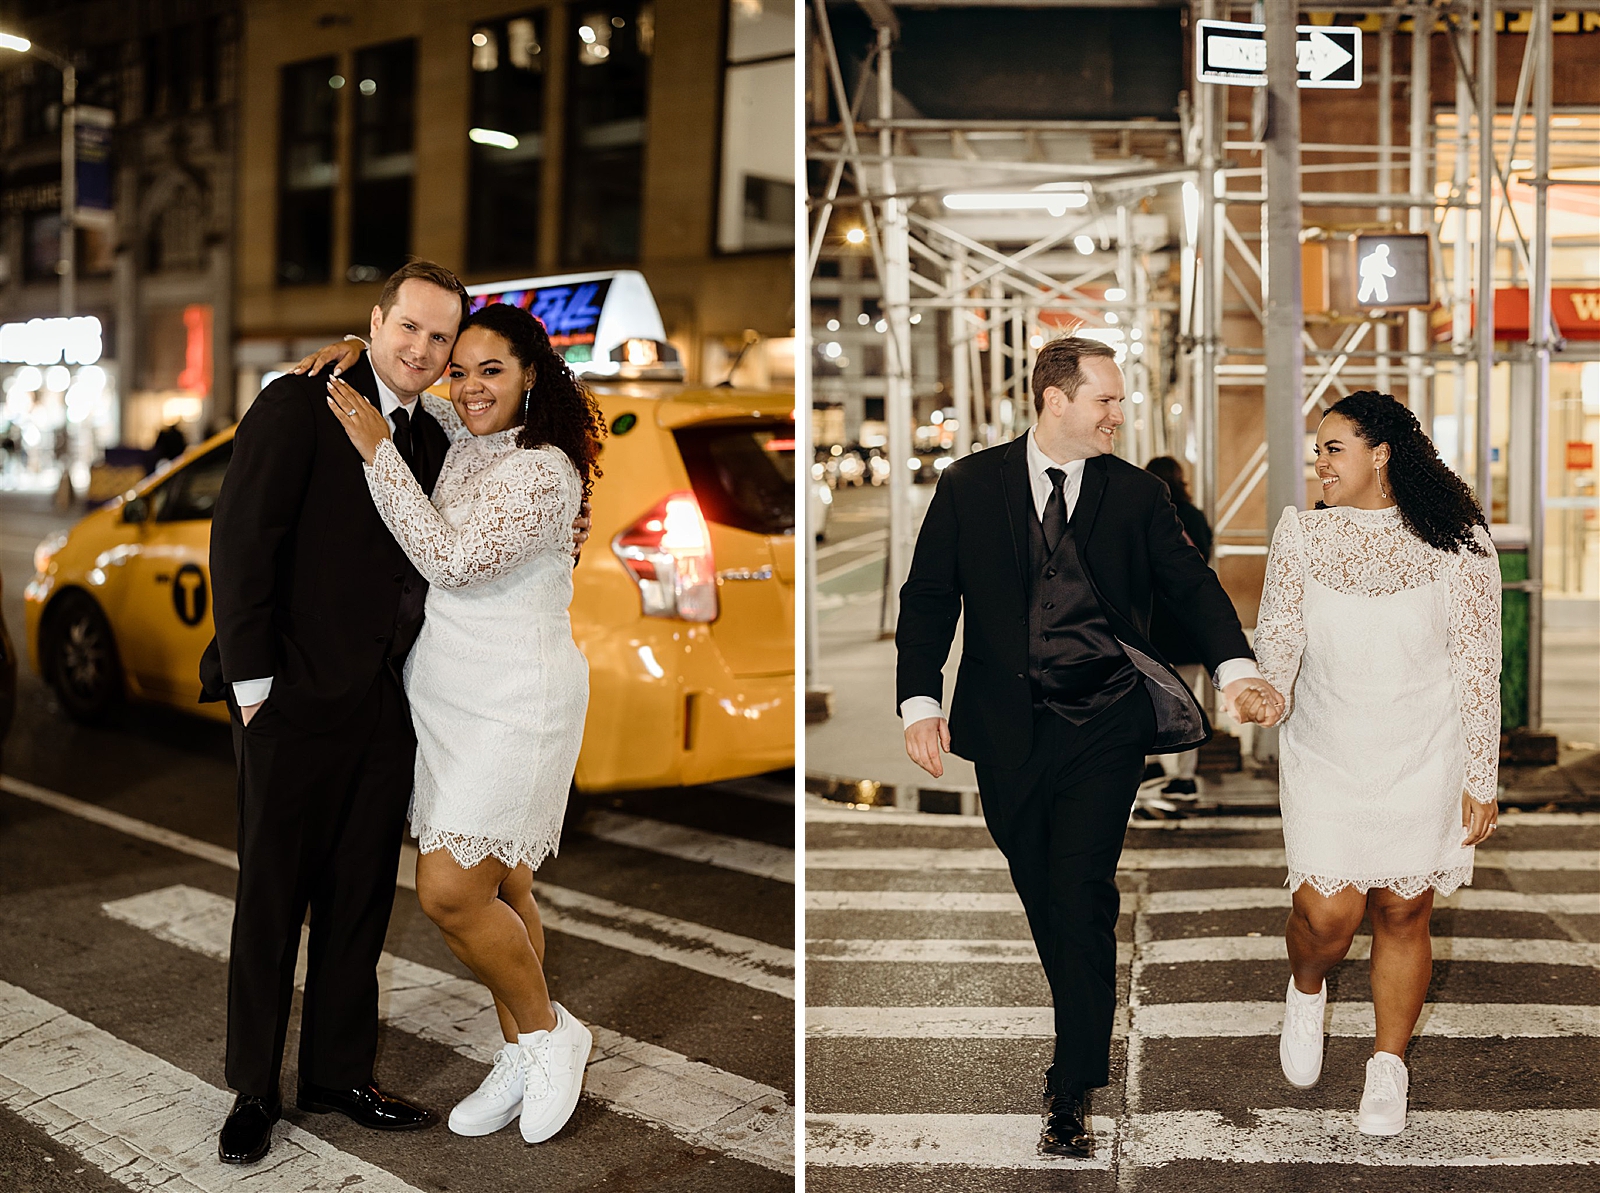 Left photo: Shot of the Bride and Groom embracing in front of a New York City cab. 
Right photo: Bride and Groom smile at each other as they cross the street hand in hand. 